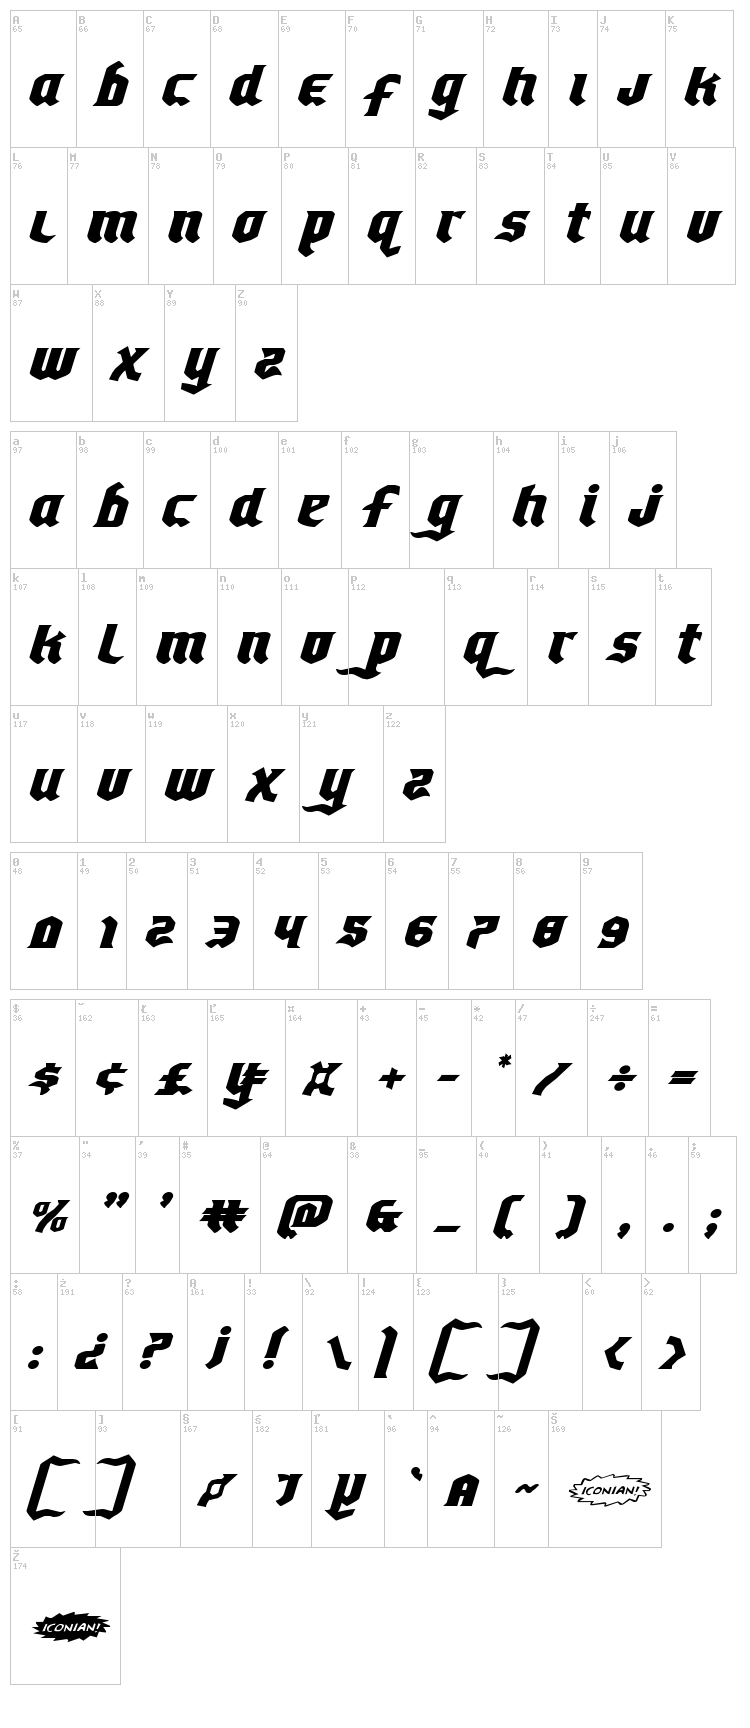 Empire Crown font map